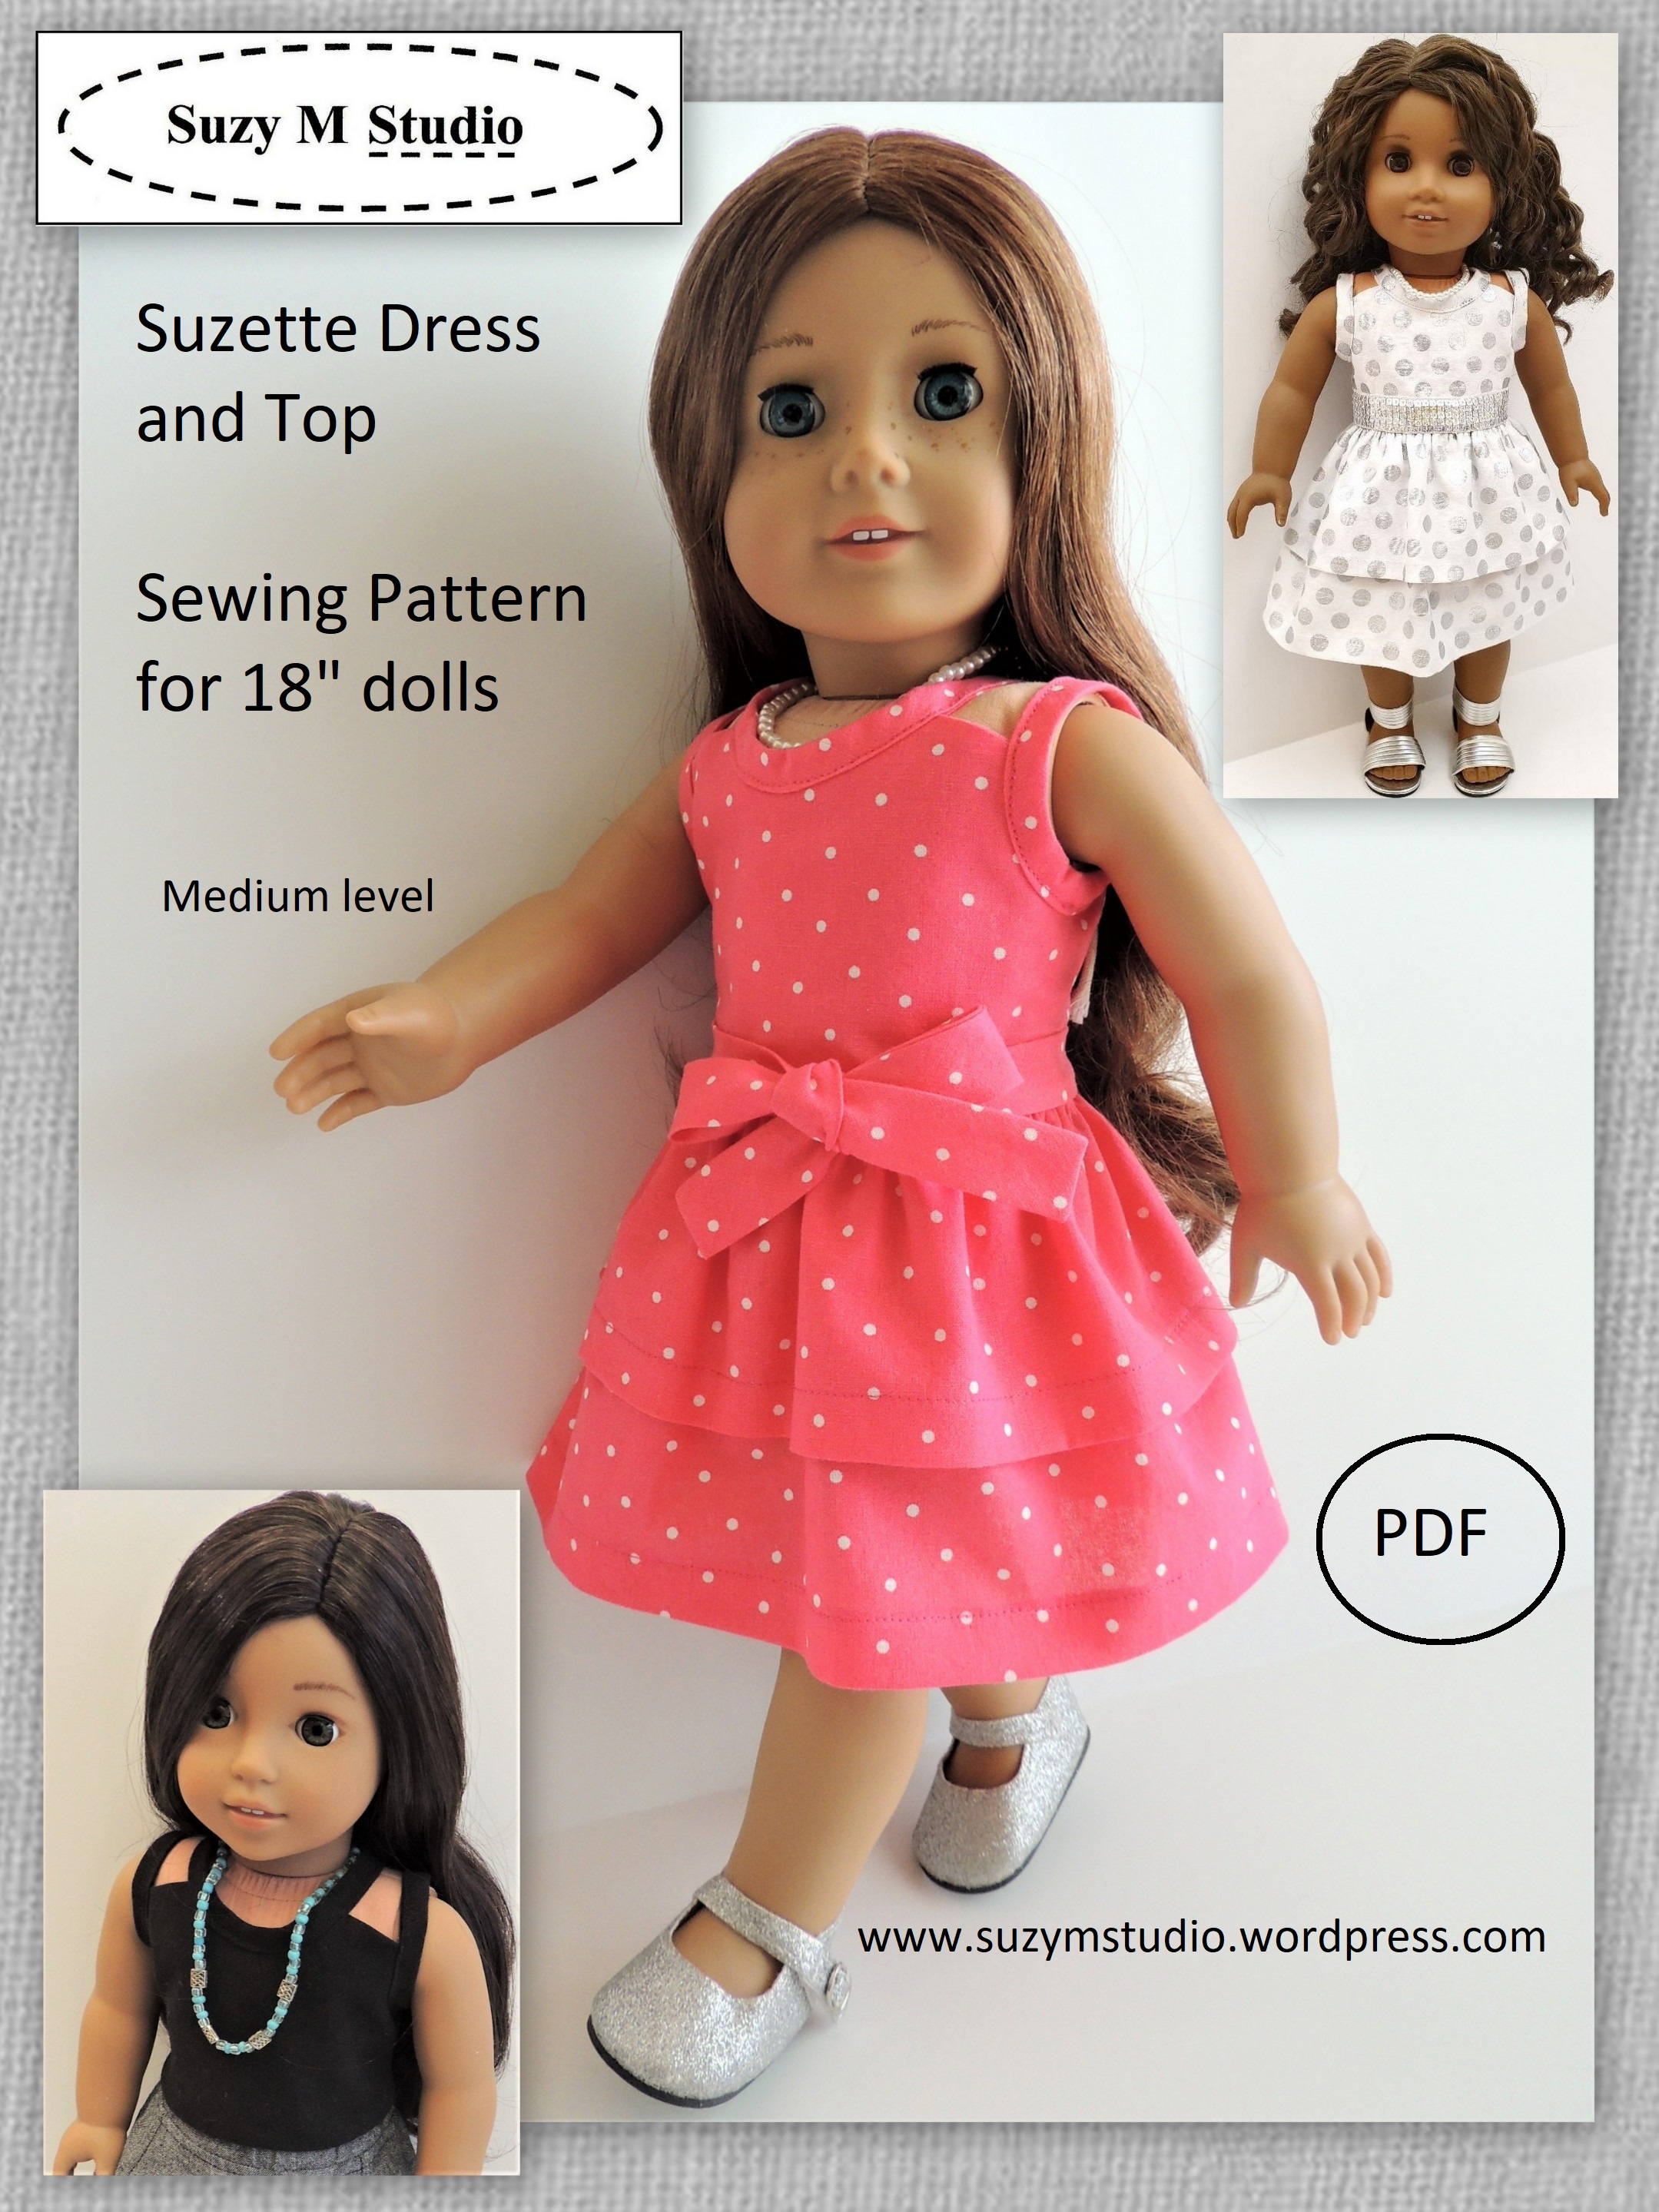 Suzette Dress and Top sewing pattern SuzyMStudio